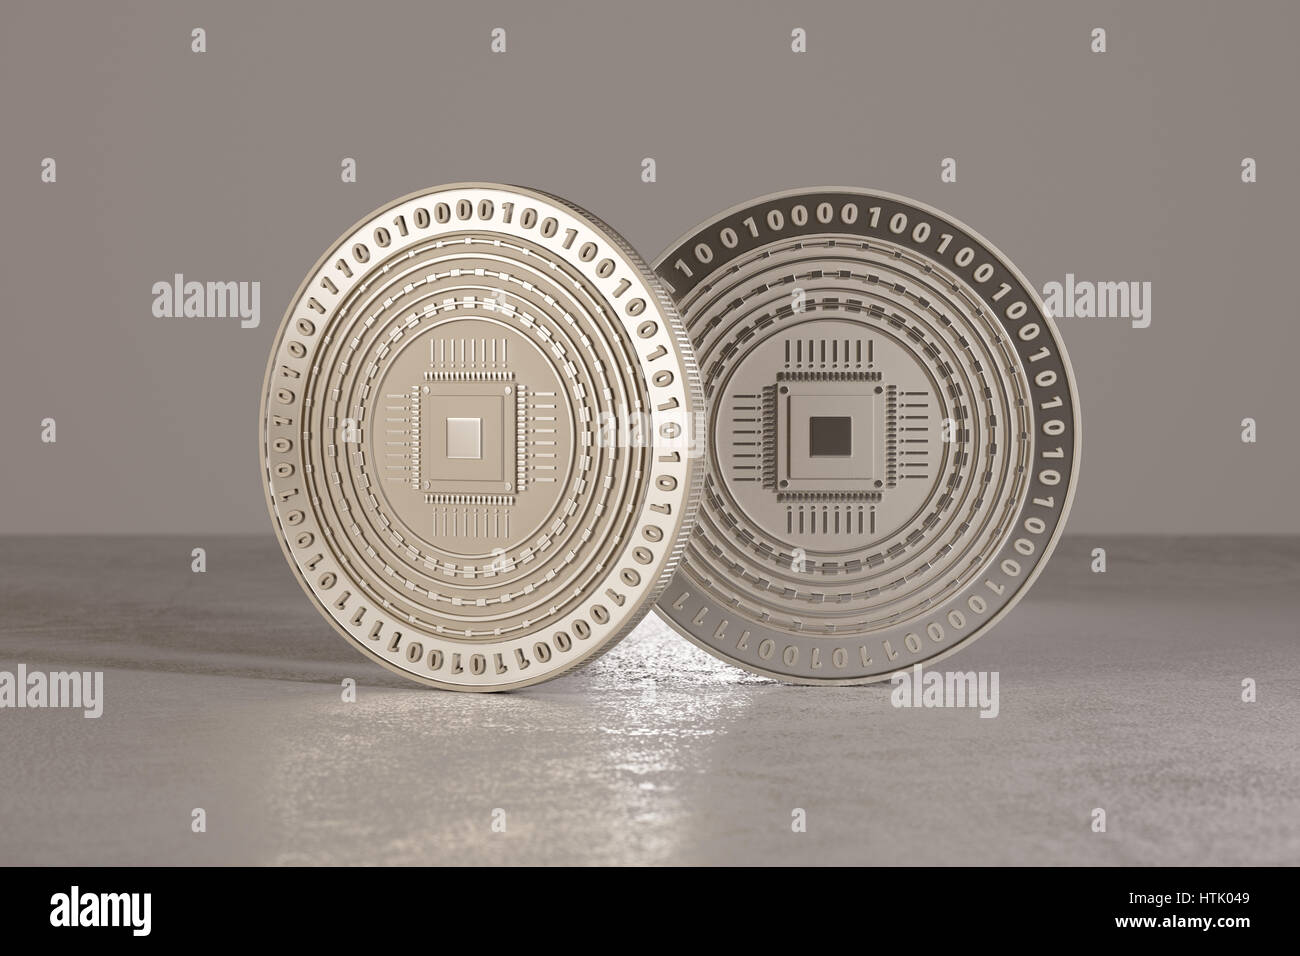 Silver digital crypto-currency coins standing on metal floor as example for virtual currency and fin-tech Stock Photo